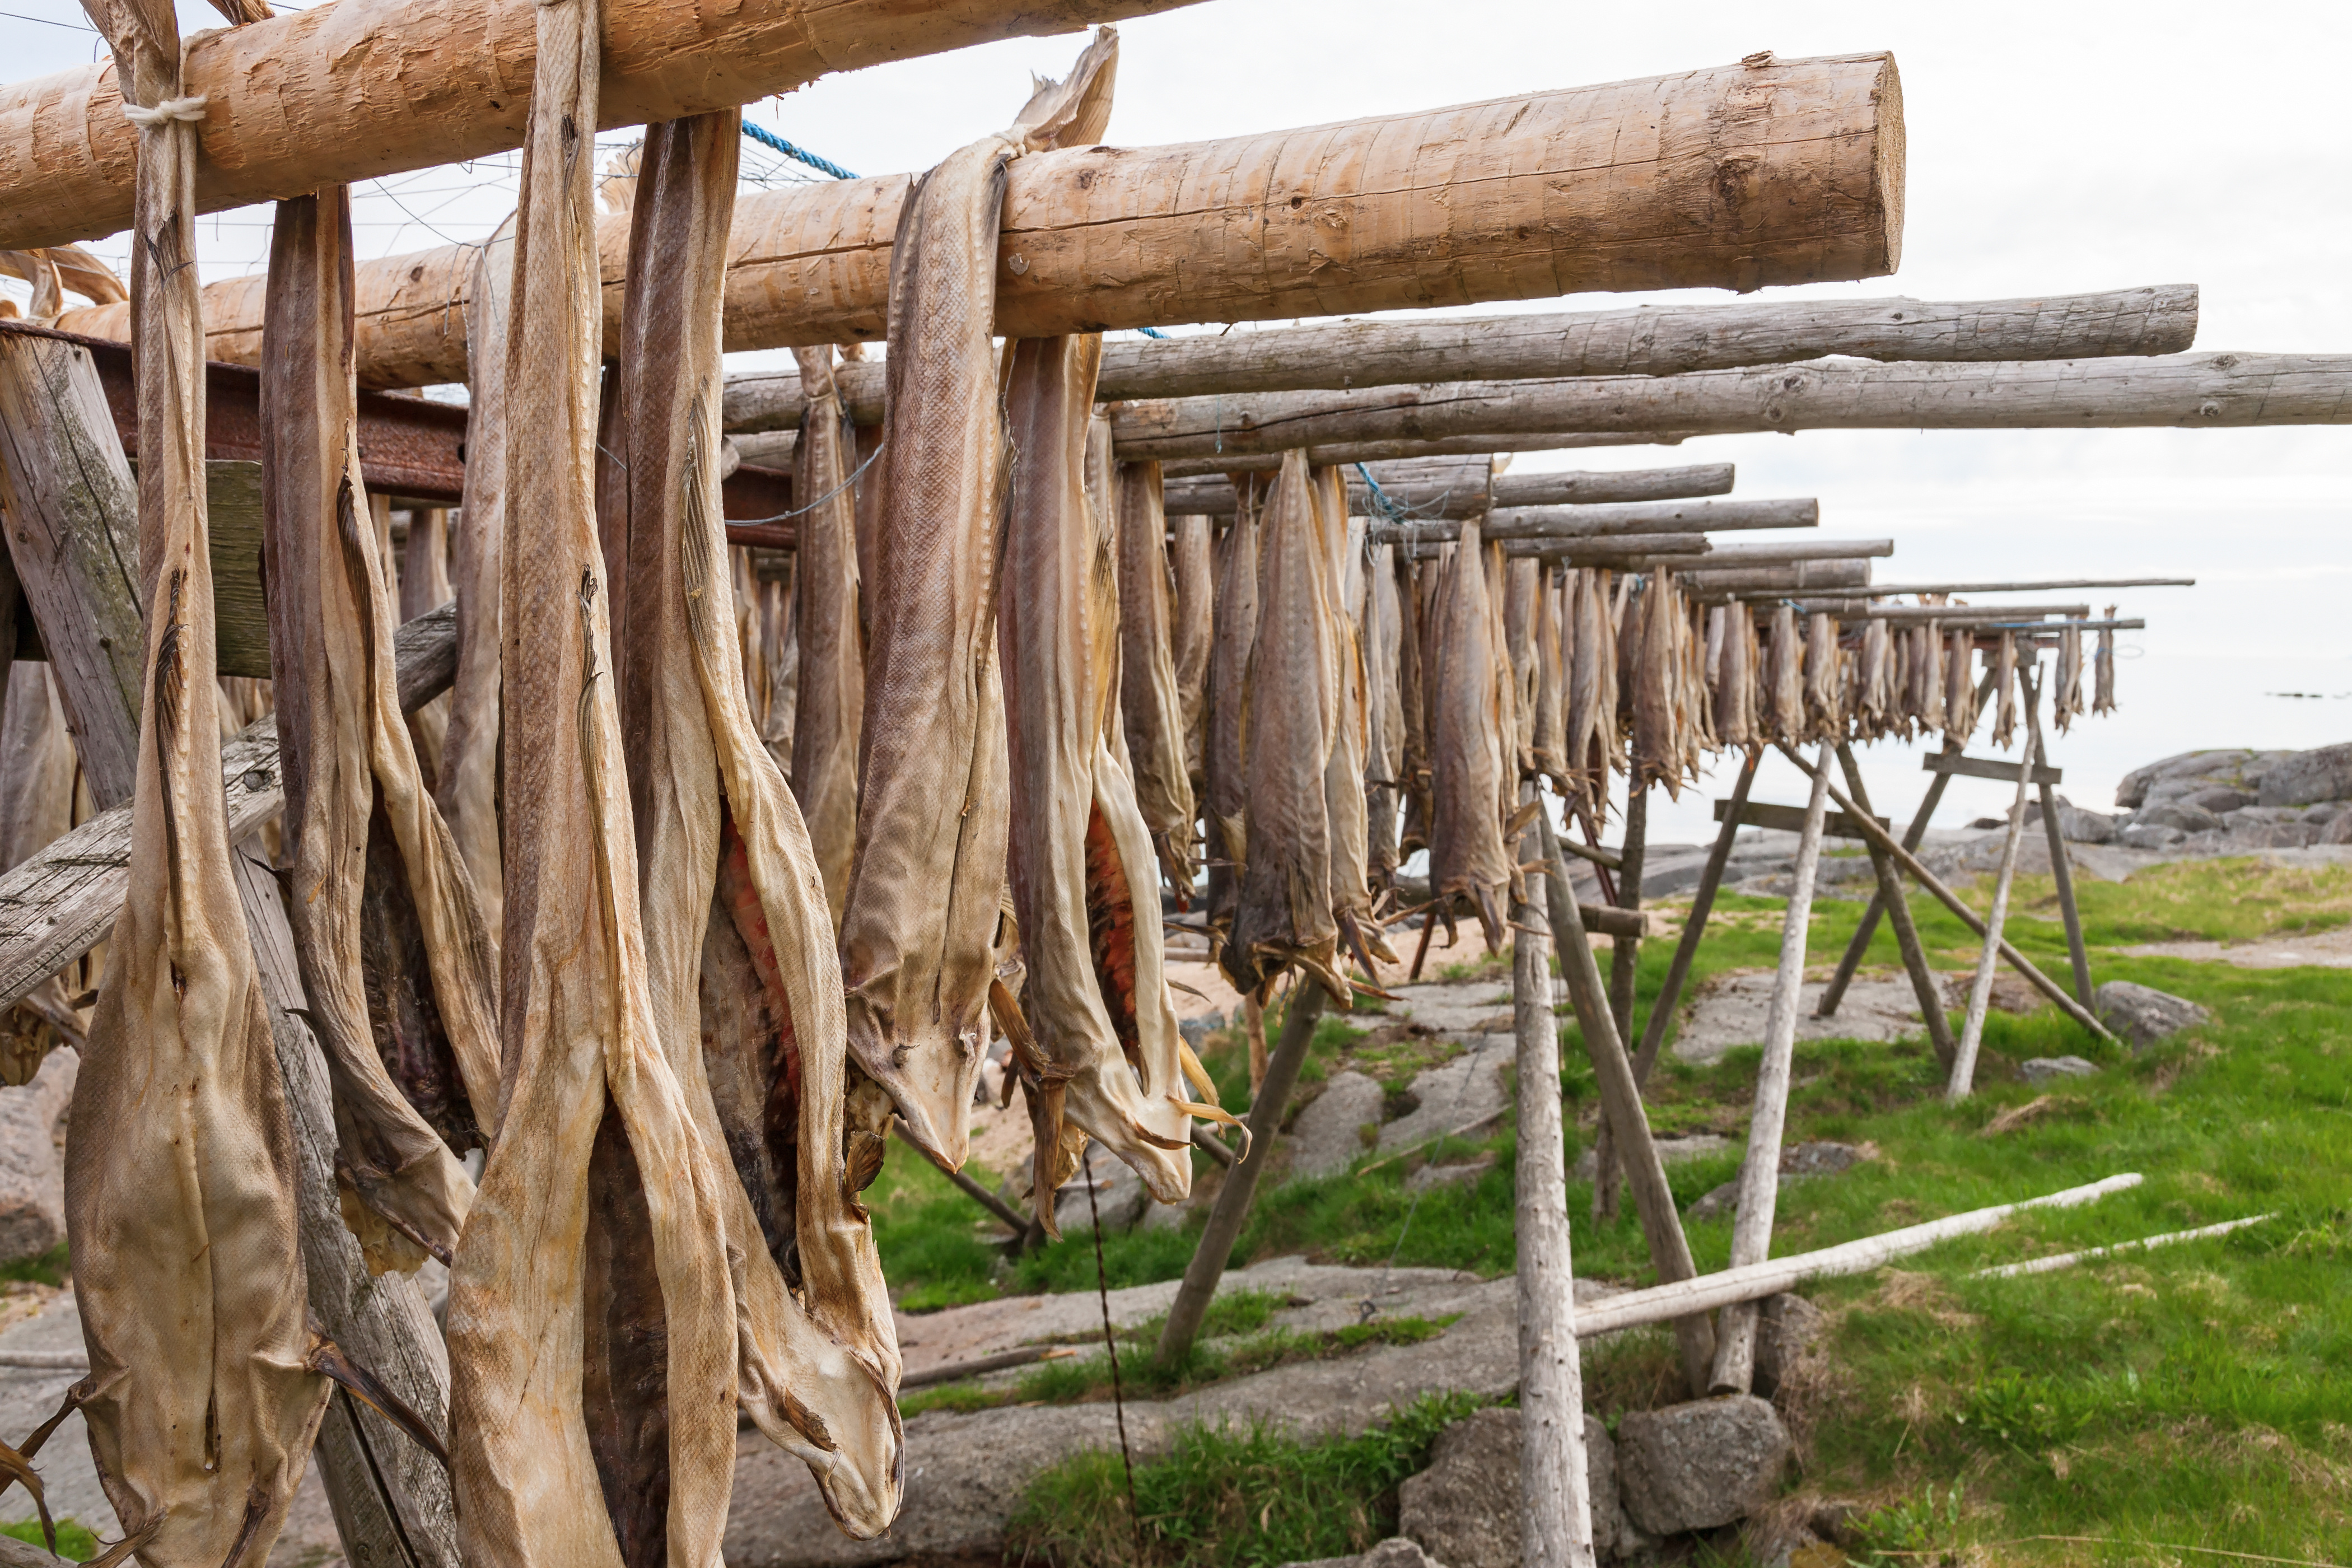 Stockfish hanging up to dry